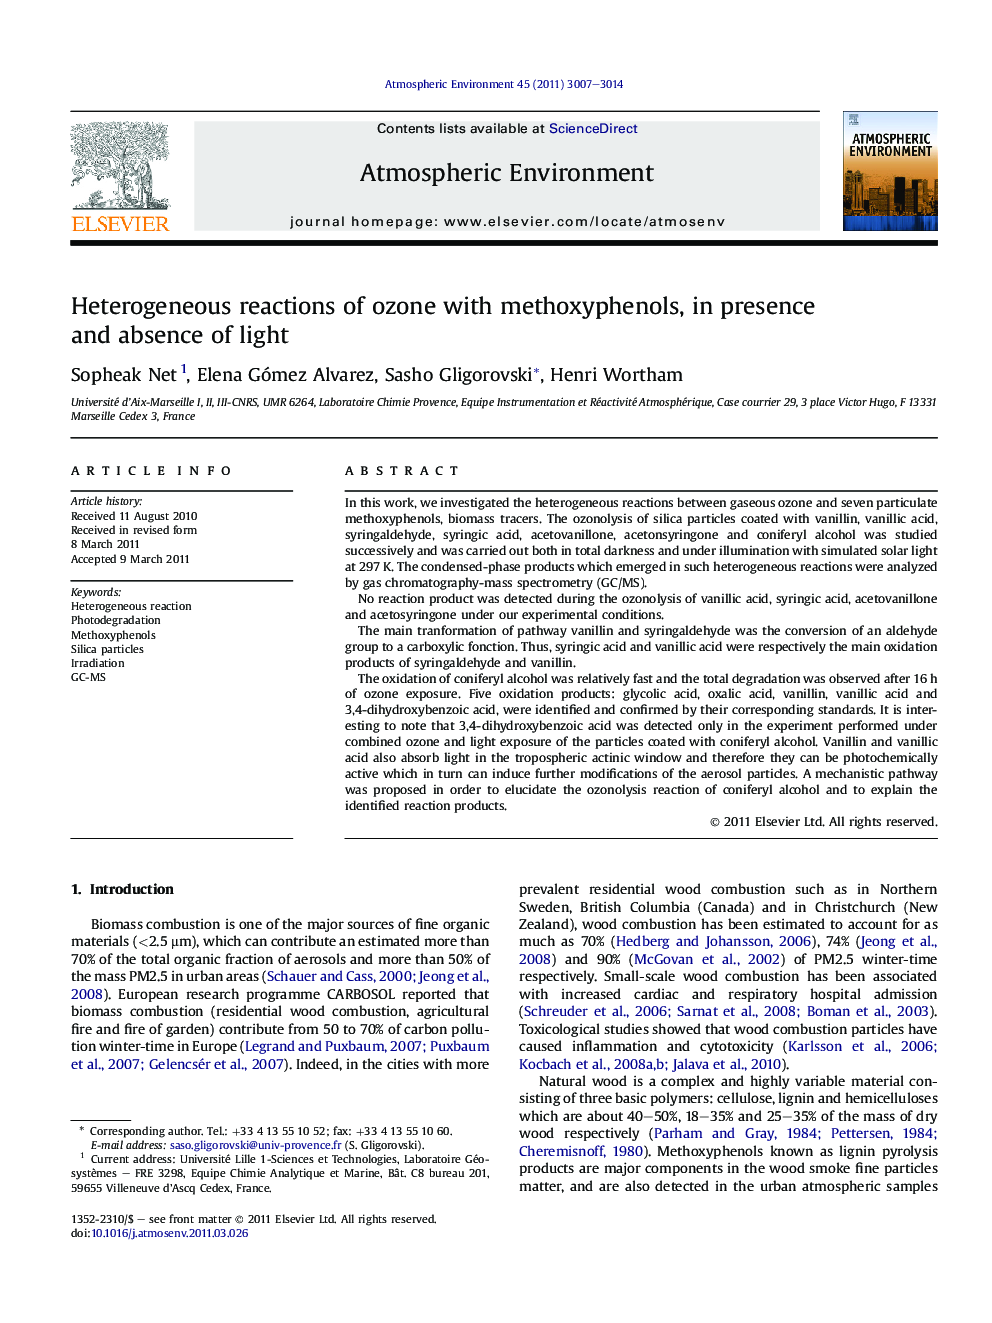 Heterogeneous reactions of ozone with methoxyphenols, in presence and absence of light